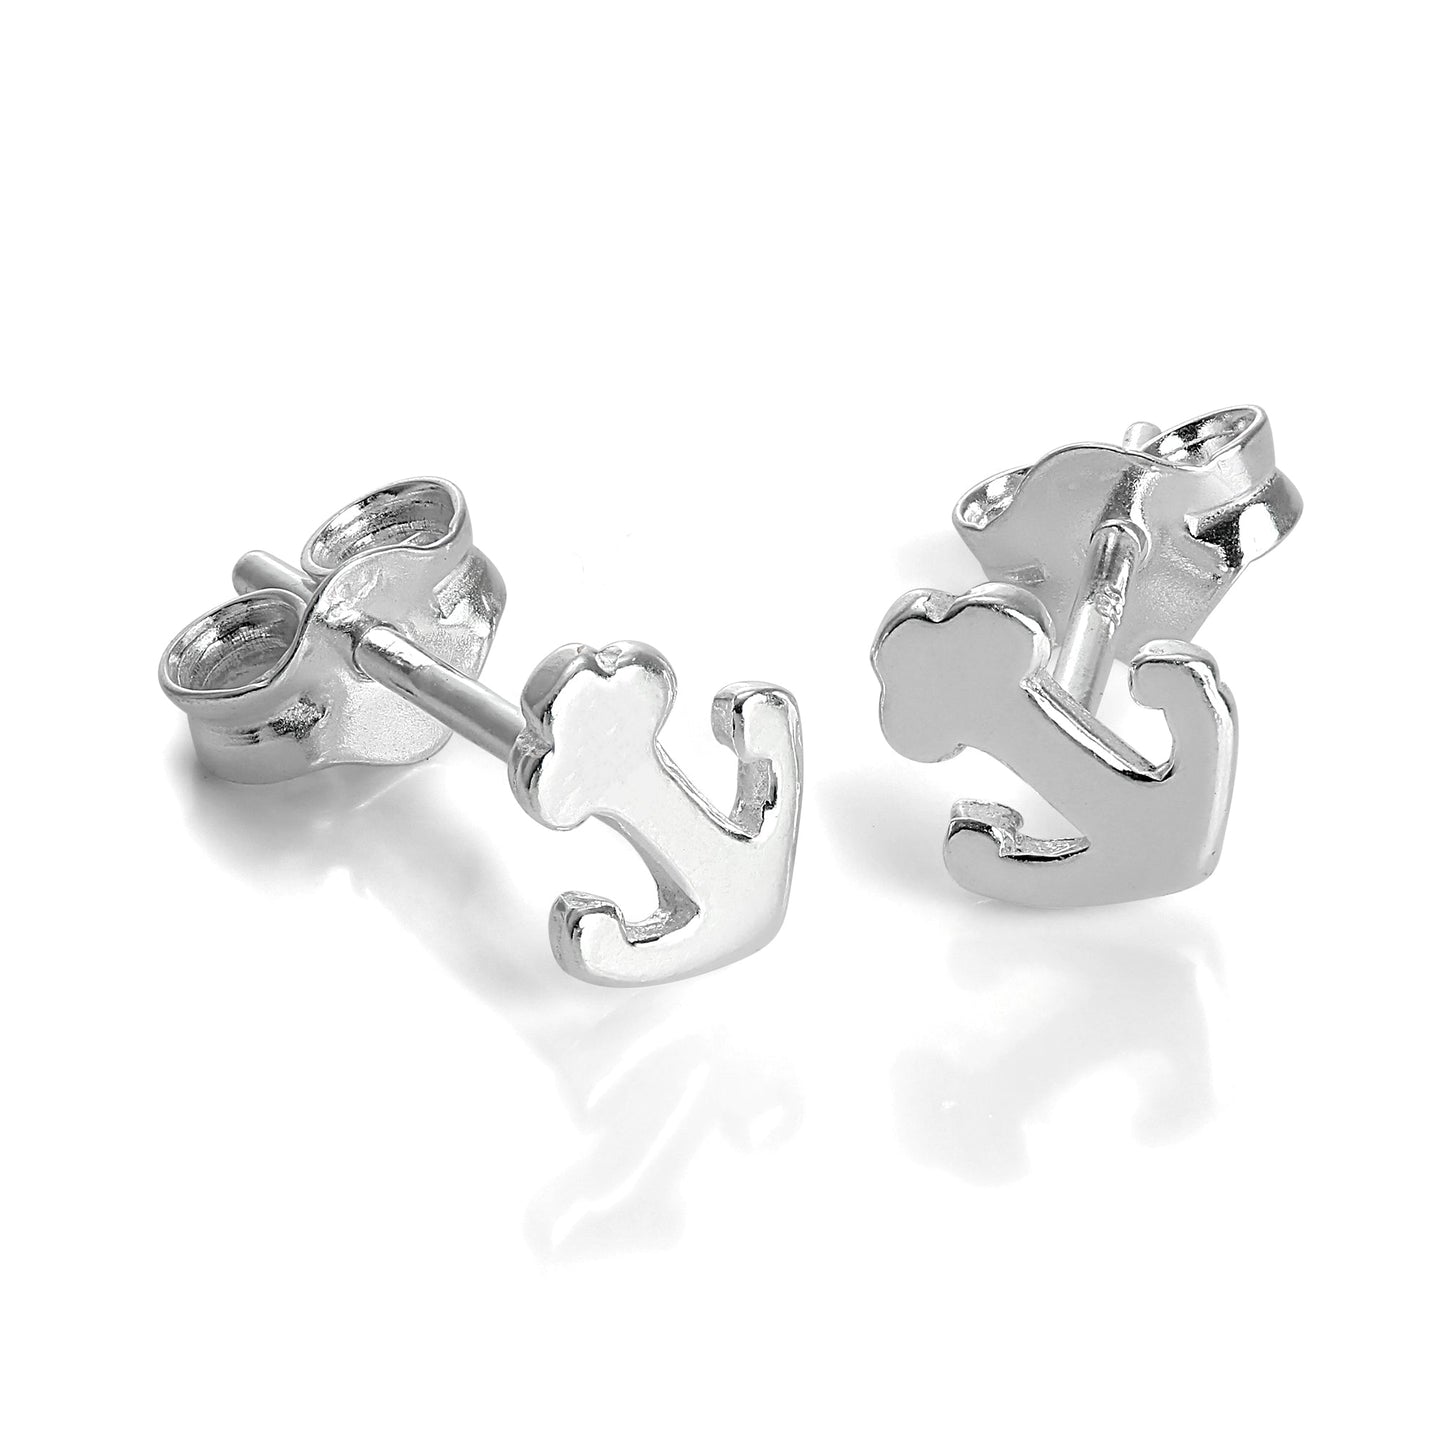 Small Sterling Silver Anchor Stud Earrings